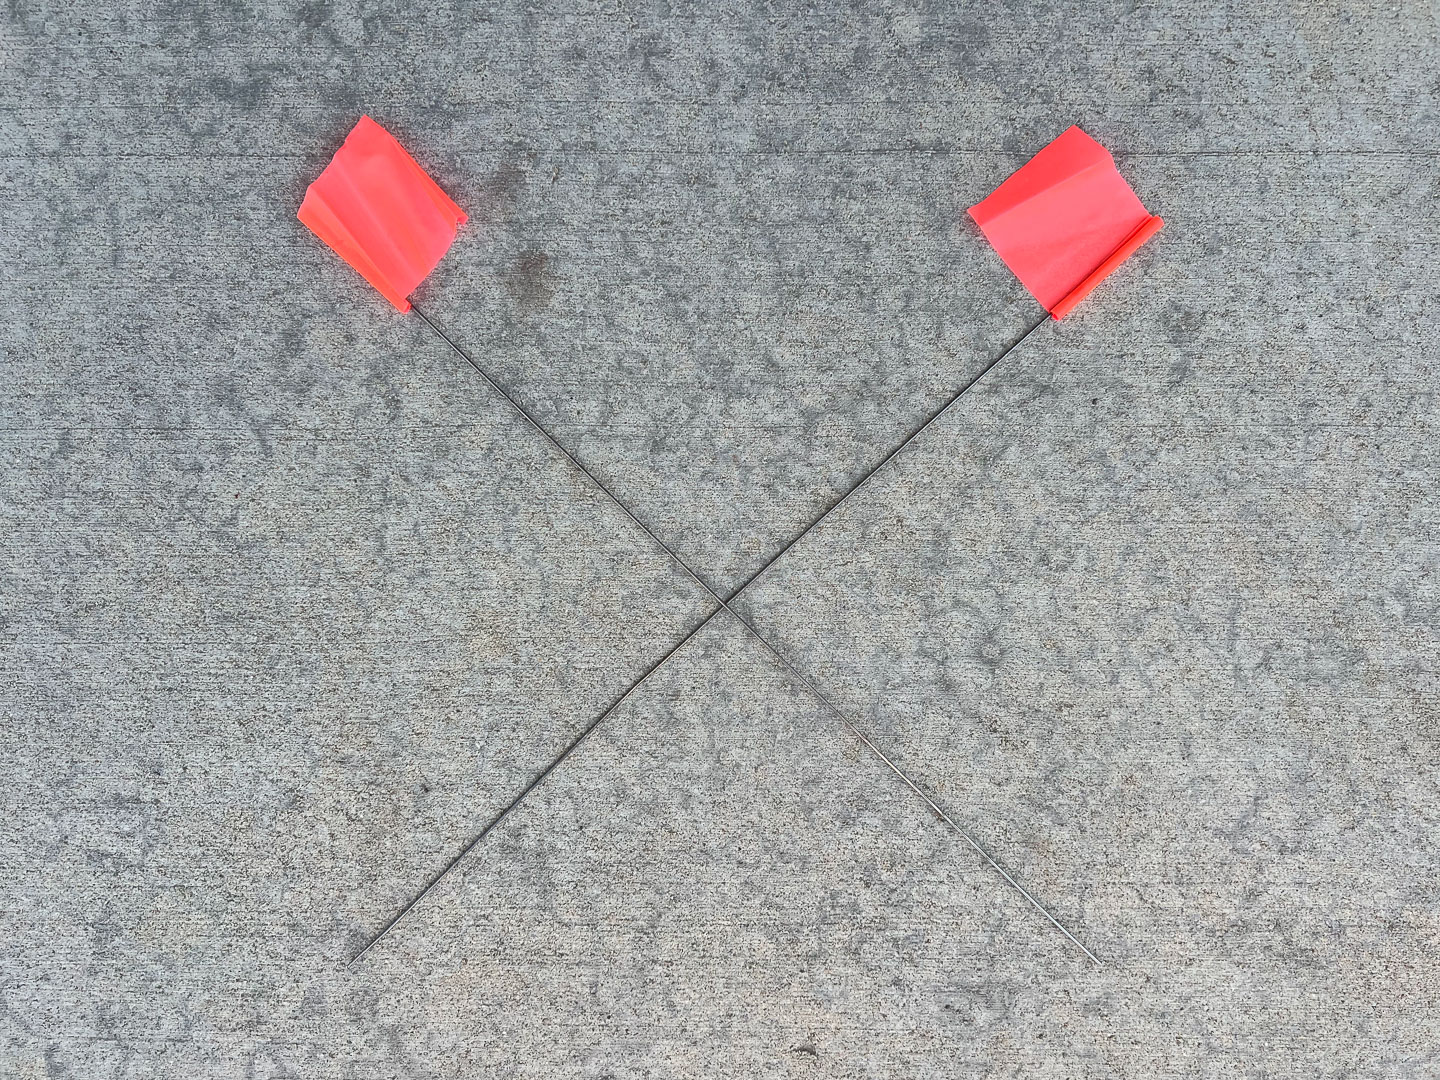 Two fluorescent pink landscape marking flags.